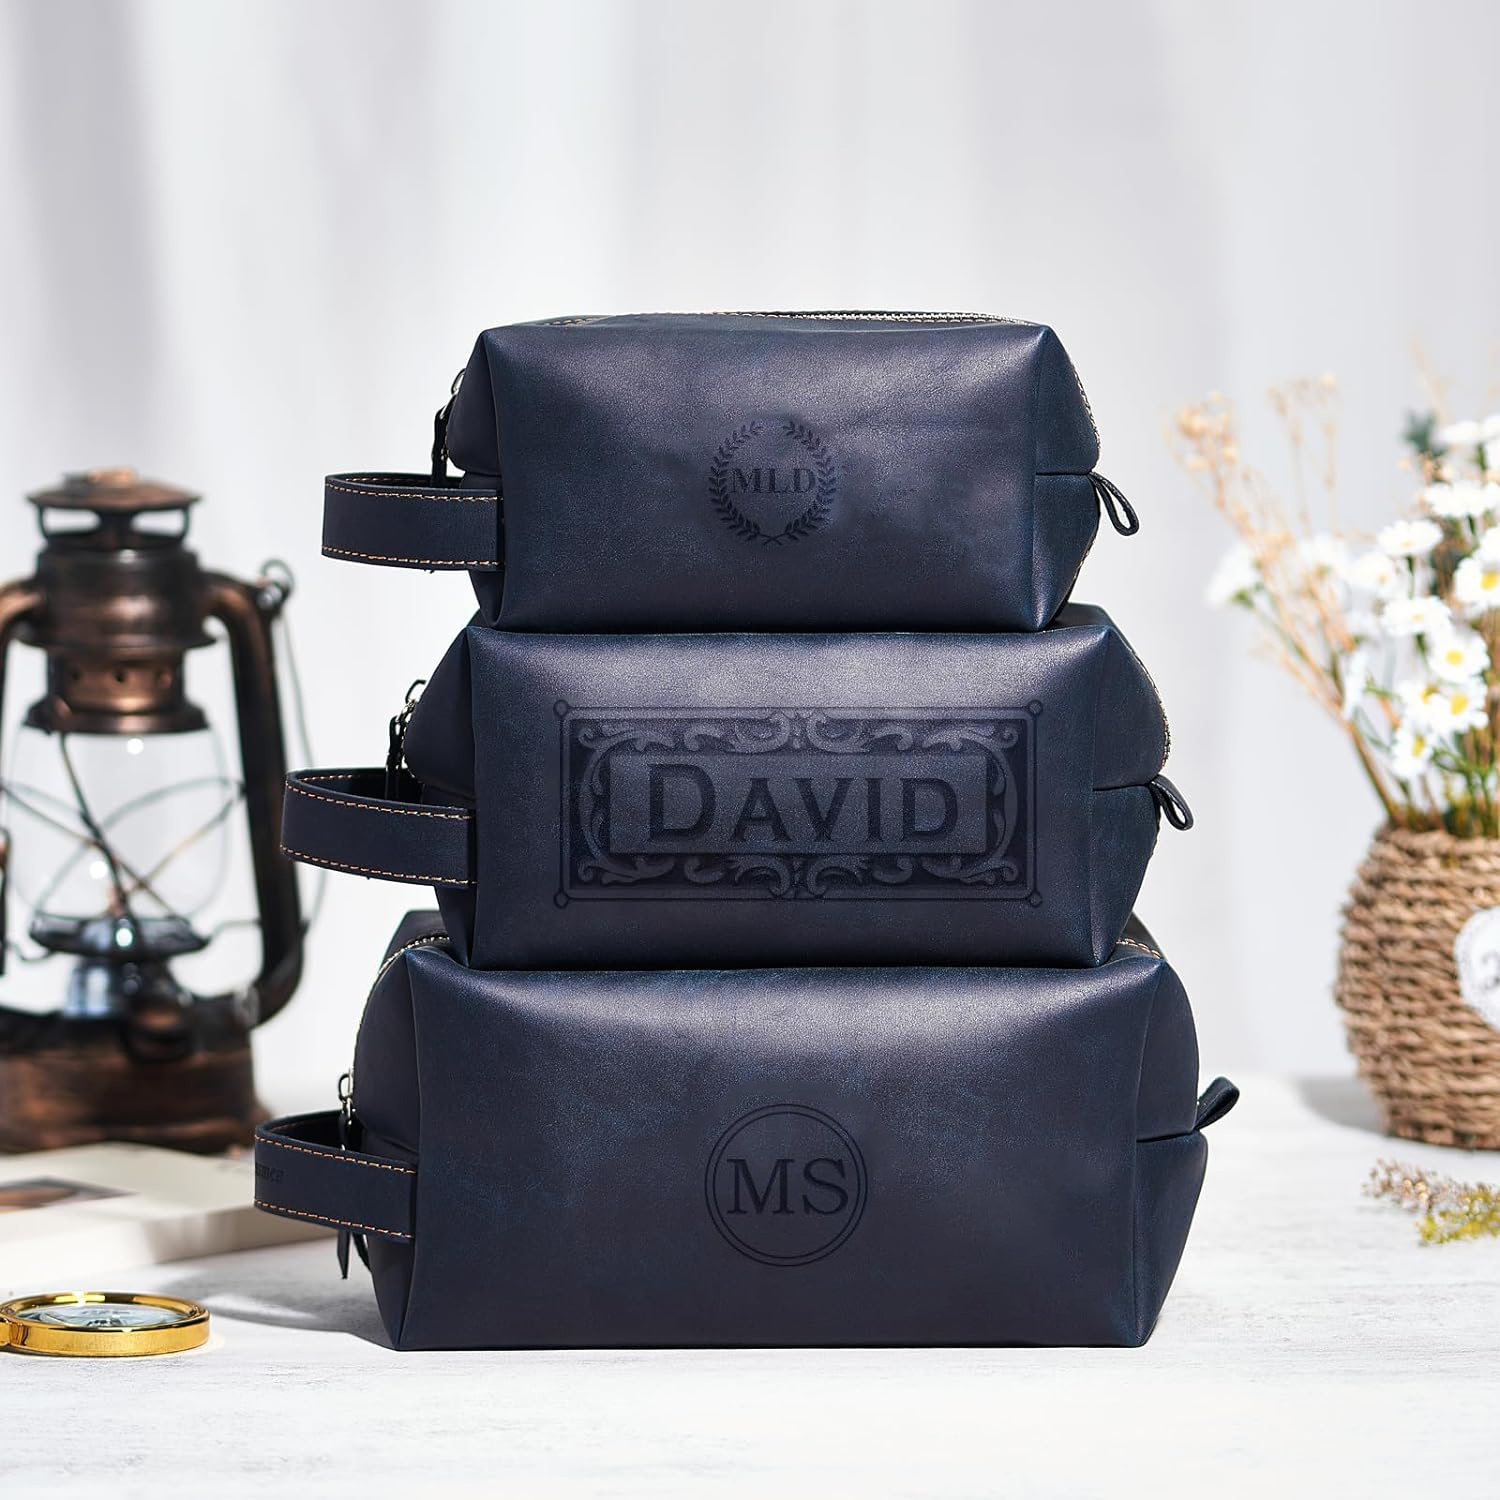 

Personalized Men's Faux Leather Toiletry Bag, Customized Name Text Portable Dopp Kit, Unique Custom Storage Bag, Personalized Gifts For Father's Day Wedding Gift For Groomsmen Dad Best Man Husband